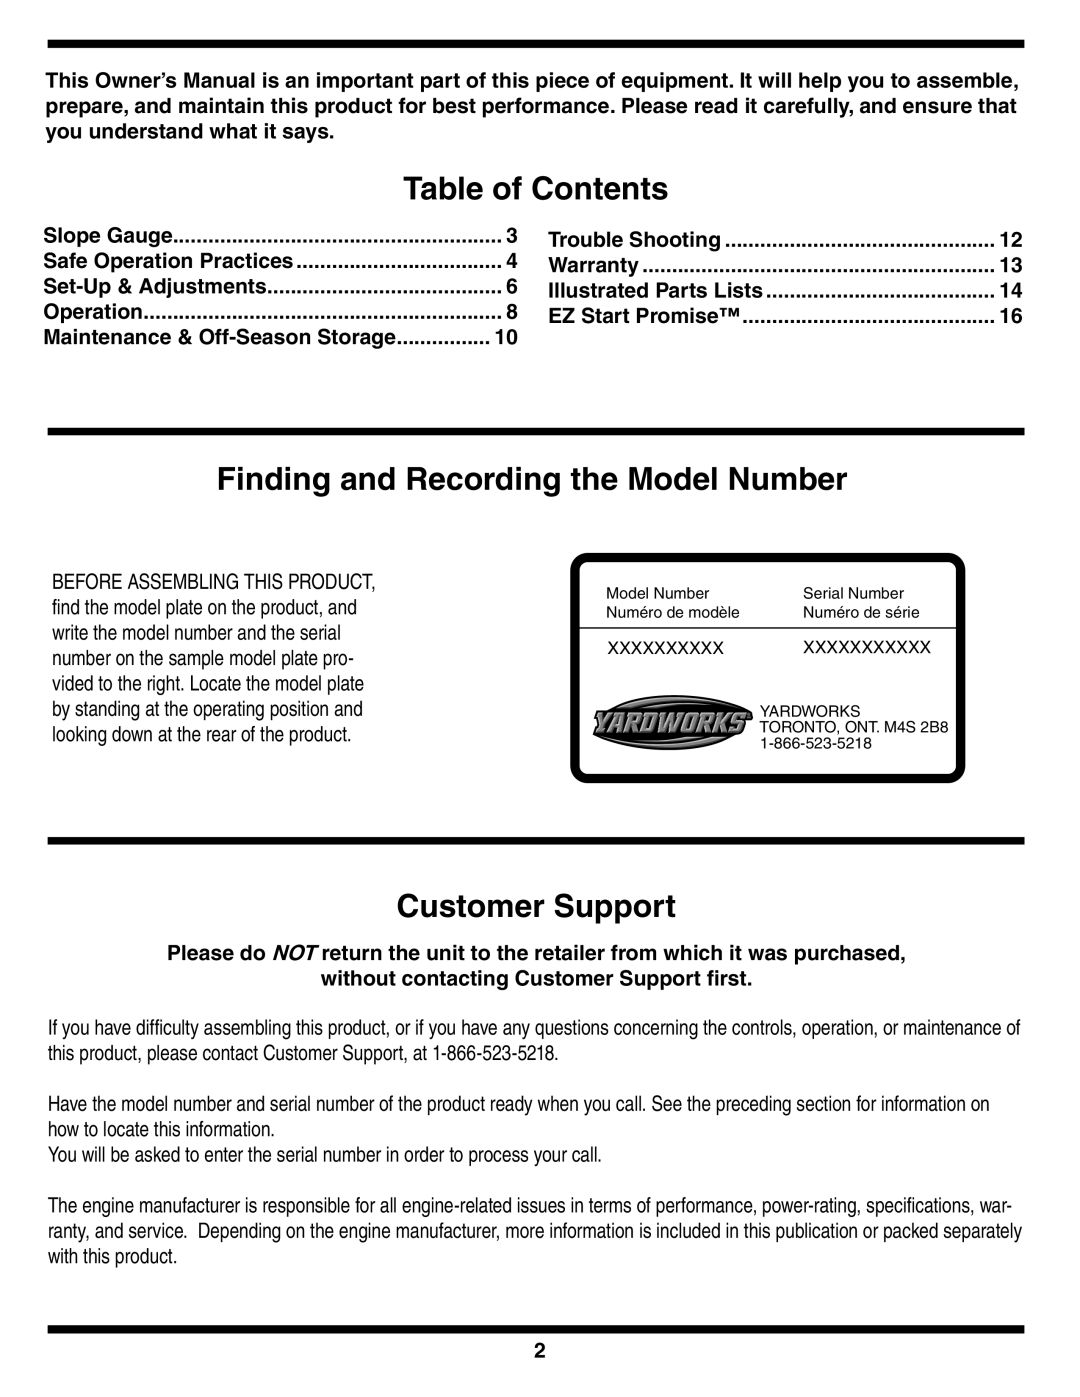 MTD 60-1620-4 owner manual Table of Contents, Finding and Recording the Model Number, Customer Support 